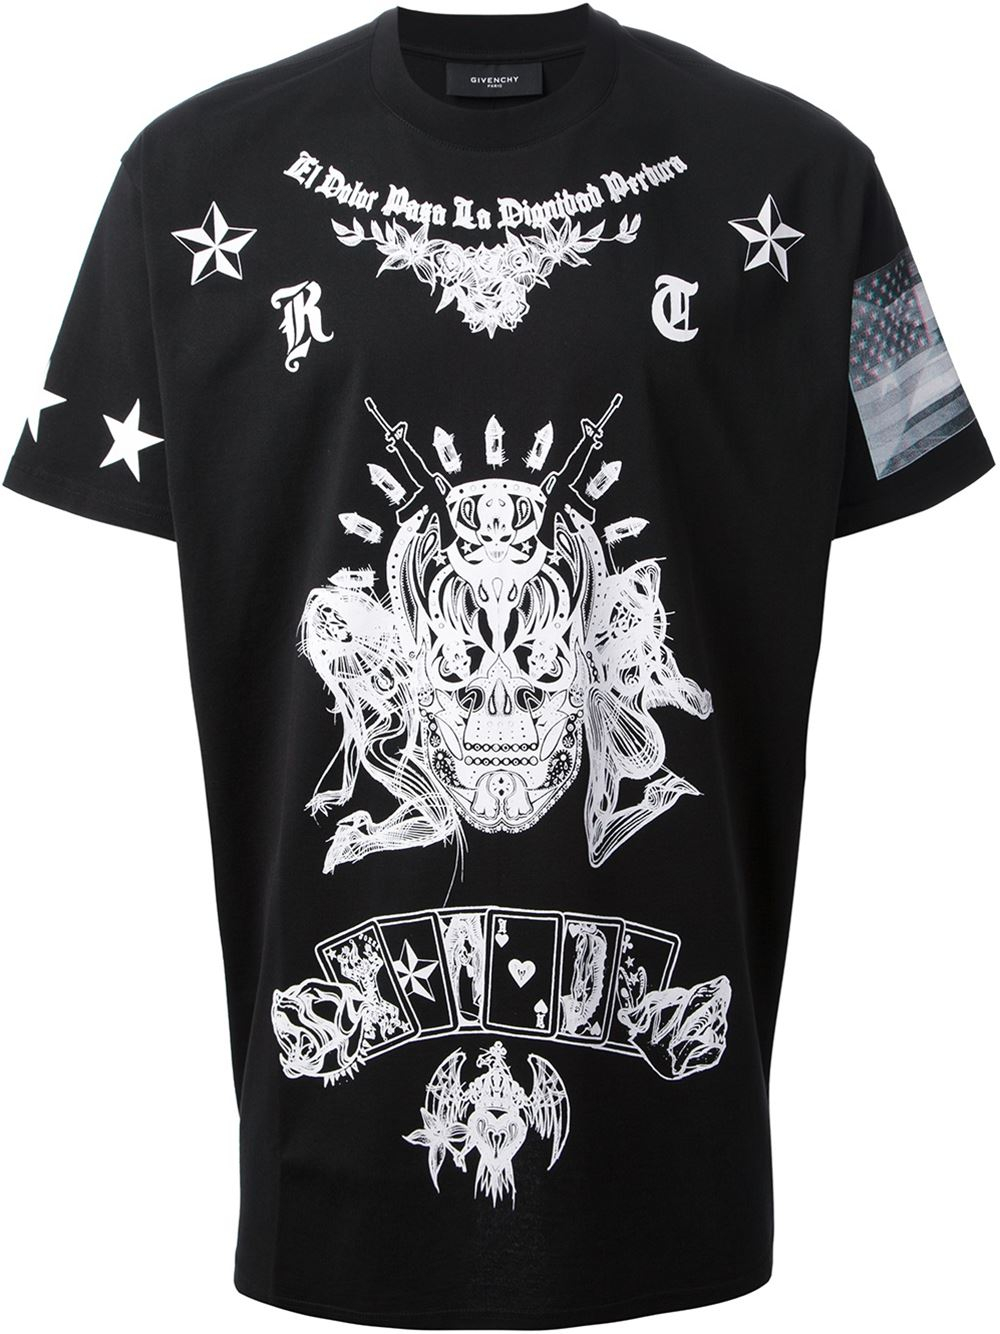 Lyst - Givenchy Oversize Tshirt in Black for Men